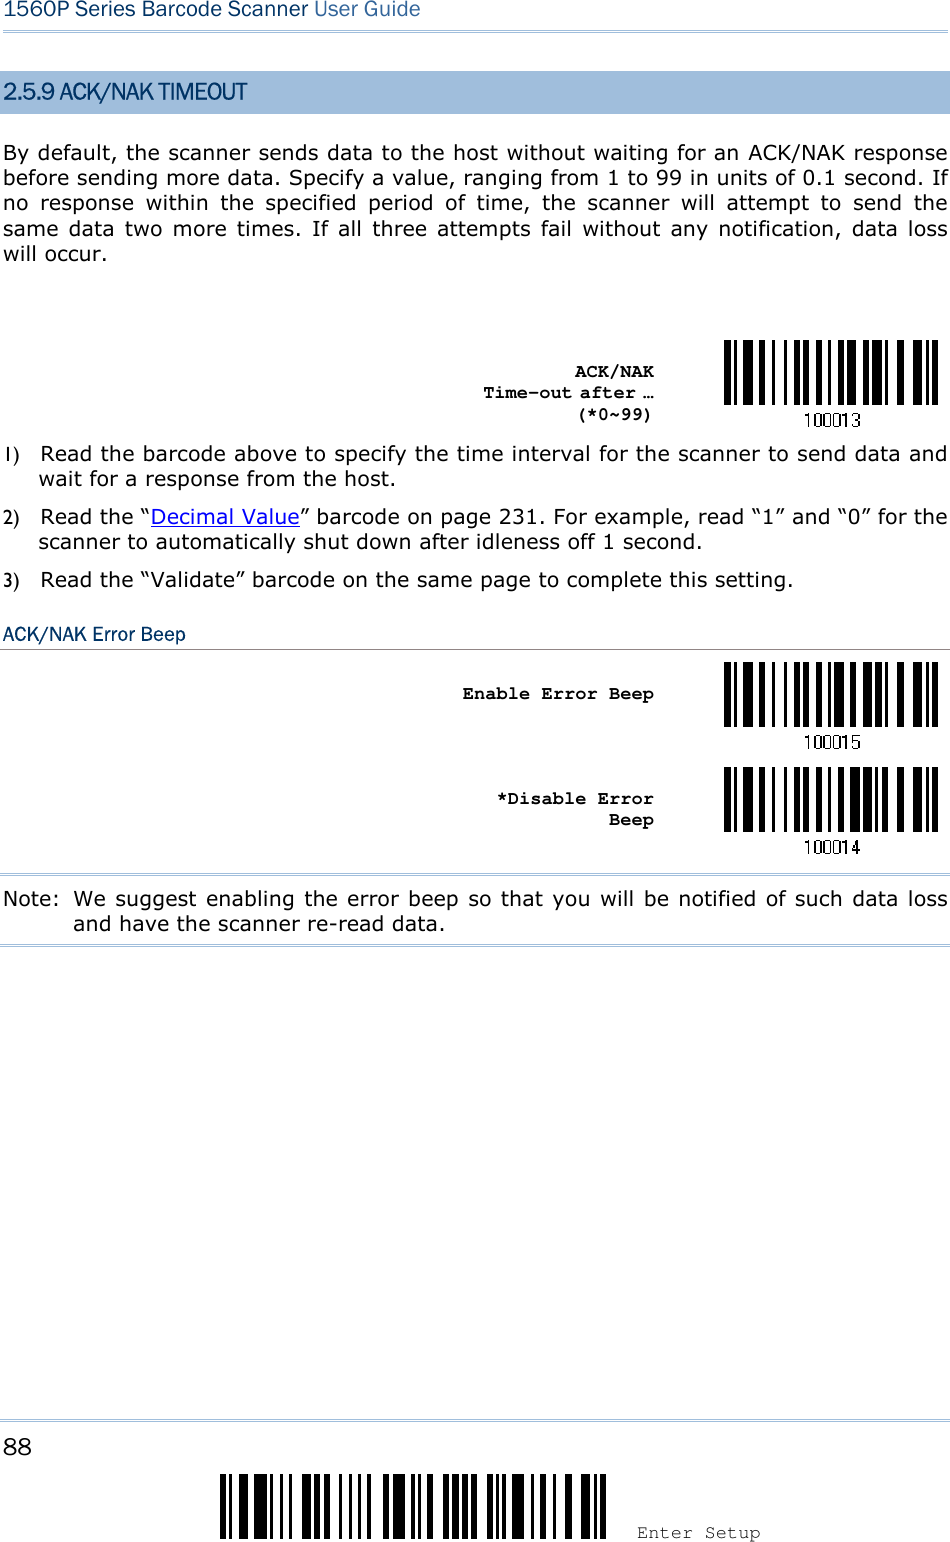 88 Enter Setup 1560P Series Barcode Scanner User Guide 2.5.9 ACK/NAK TIMEOUT By default, the scanner sends data to the host without waiting for an ACK/NAK response before sending more data. Specify a value, ranging from 1 to 99 in units of 0.1 second. If no  response  within  the  specified  period  of  time,  the  scanner  will  attempt  to  send  the same data  two more  times.  If all  three attempts  fail  without  any  notification,  data loss will occur. ACK/NAK Time-out after … (*0~99) 1) Read the barcode above to specify the time interval for the scanner to send data andwait for a response from the host.2) Read the “Decimal Value” barcode on page 231. For example, read “1” and “0” for thescanner to automatically shut down after idleness off 1 second.3) Read the “Validate” barcode on the same page to complete this setting.ACK/NAK Error Beep Enable Error Beep *Disable ErrorBeep Note:  We suggest enabling the error beep so that you will be notified of such data loss and have the scanner re-read data. 